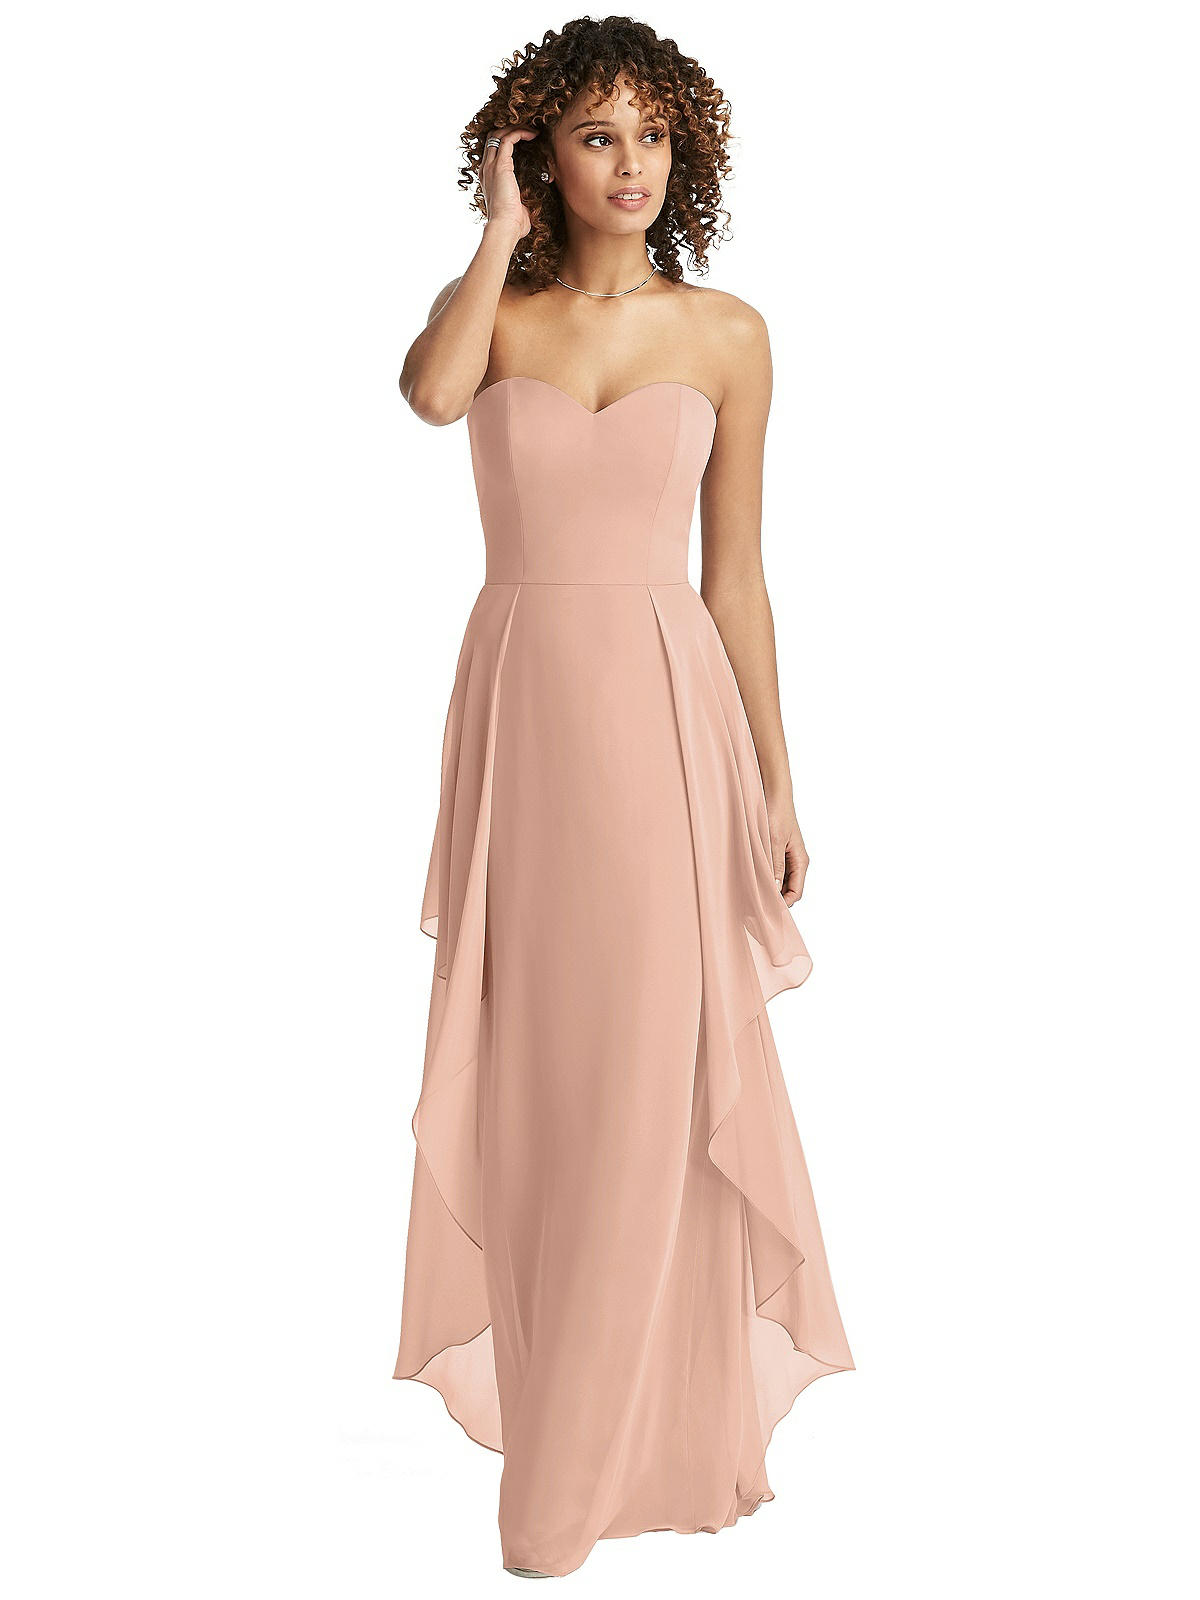 B243004_Chic Poly Chiffon Strapless A-line Gown with Asymmetrical Neckline  and Front Slit Skirt